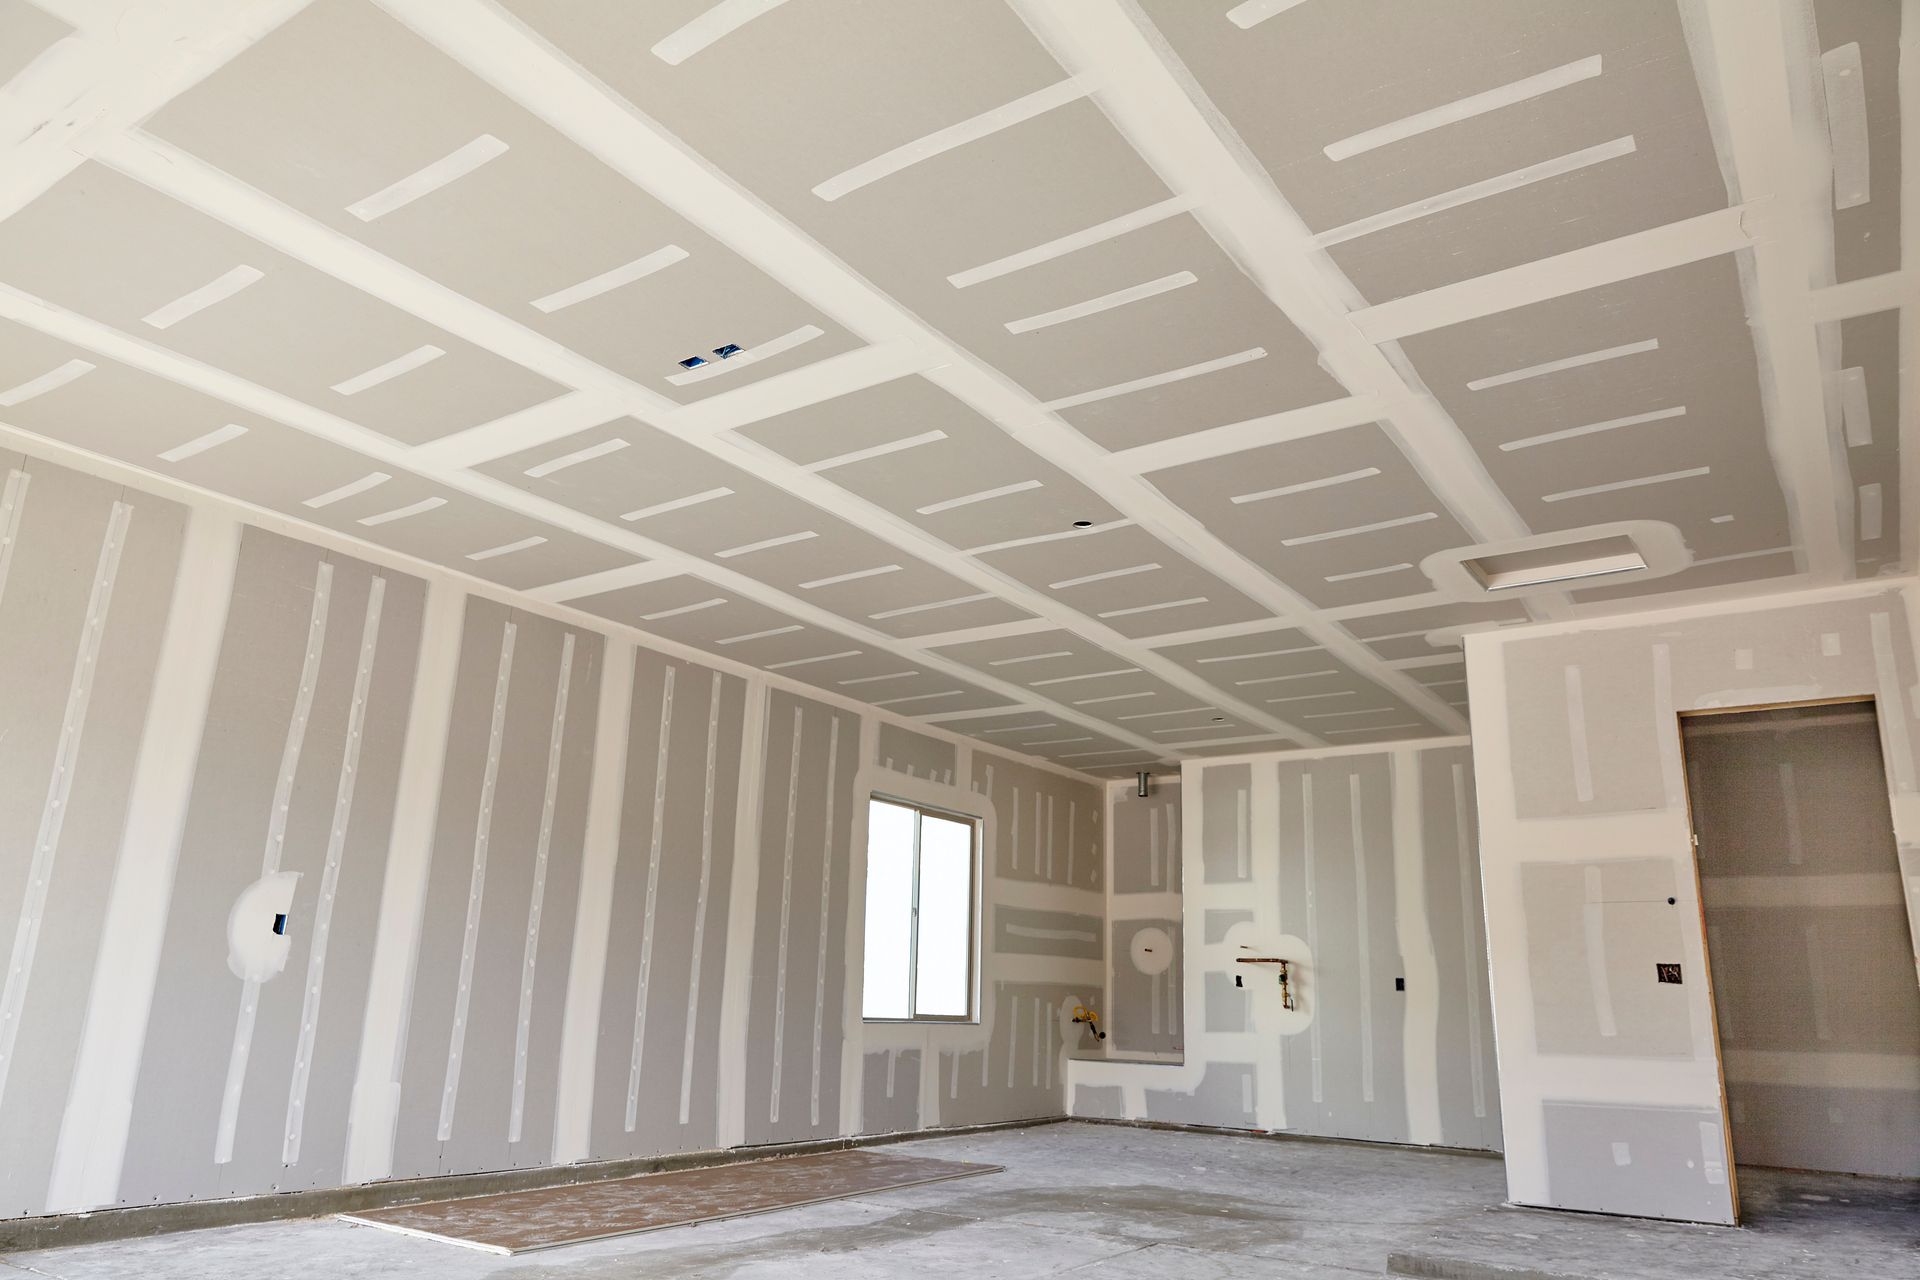 An empty room with drywall on the walls and ceiling.